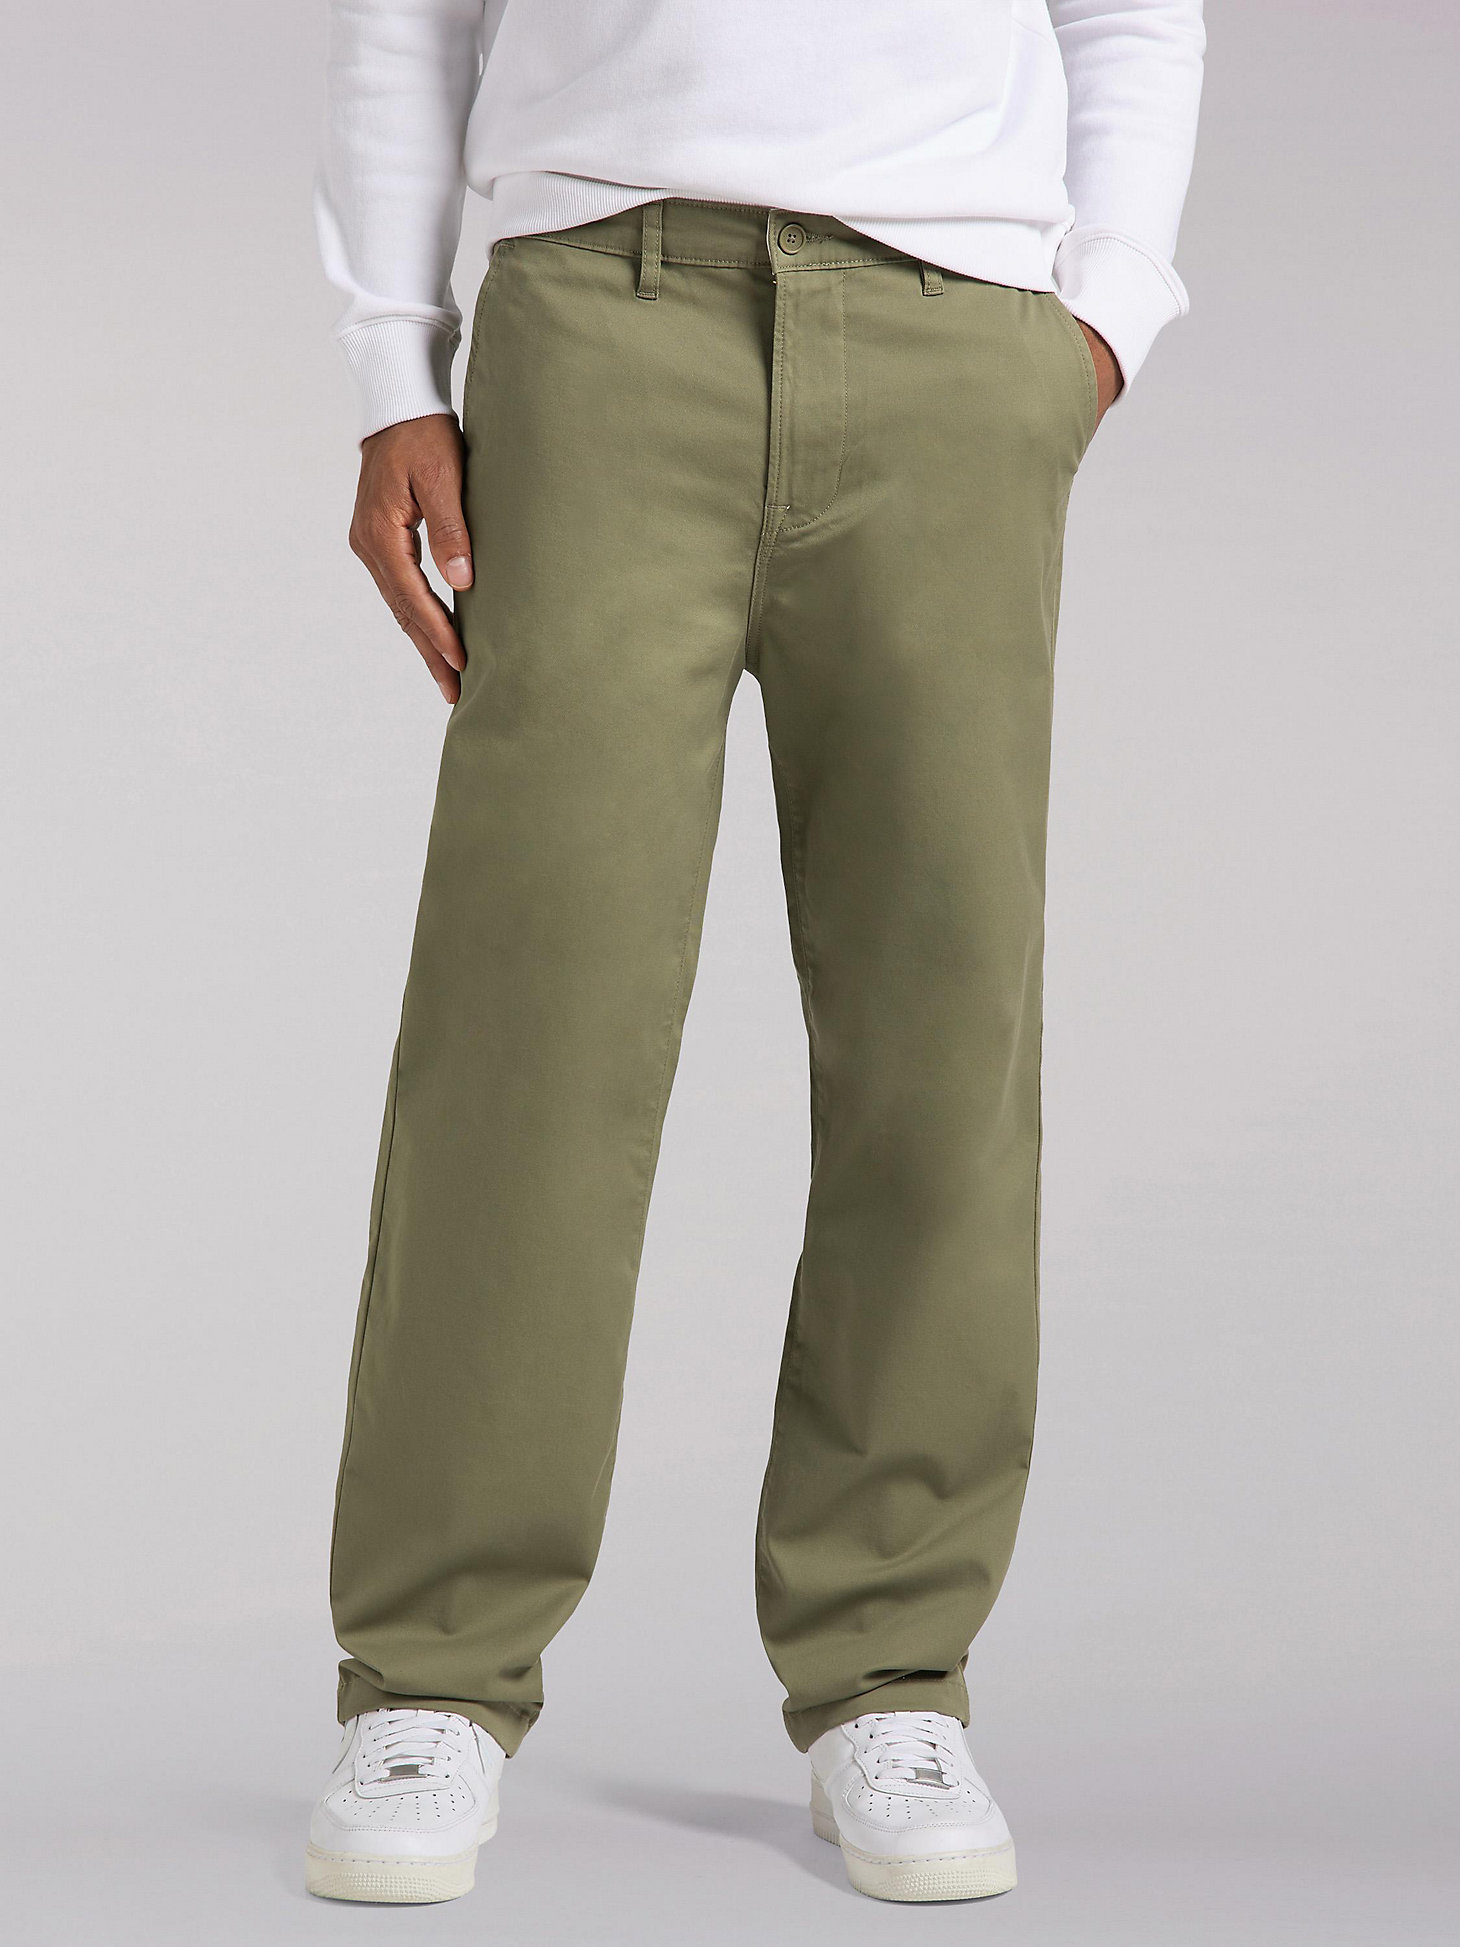 Men's European Collection Chetopa Relaxed Fit Chino in Olive Green alternative view 1